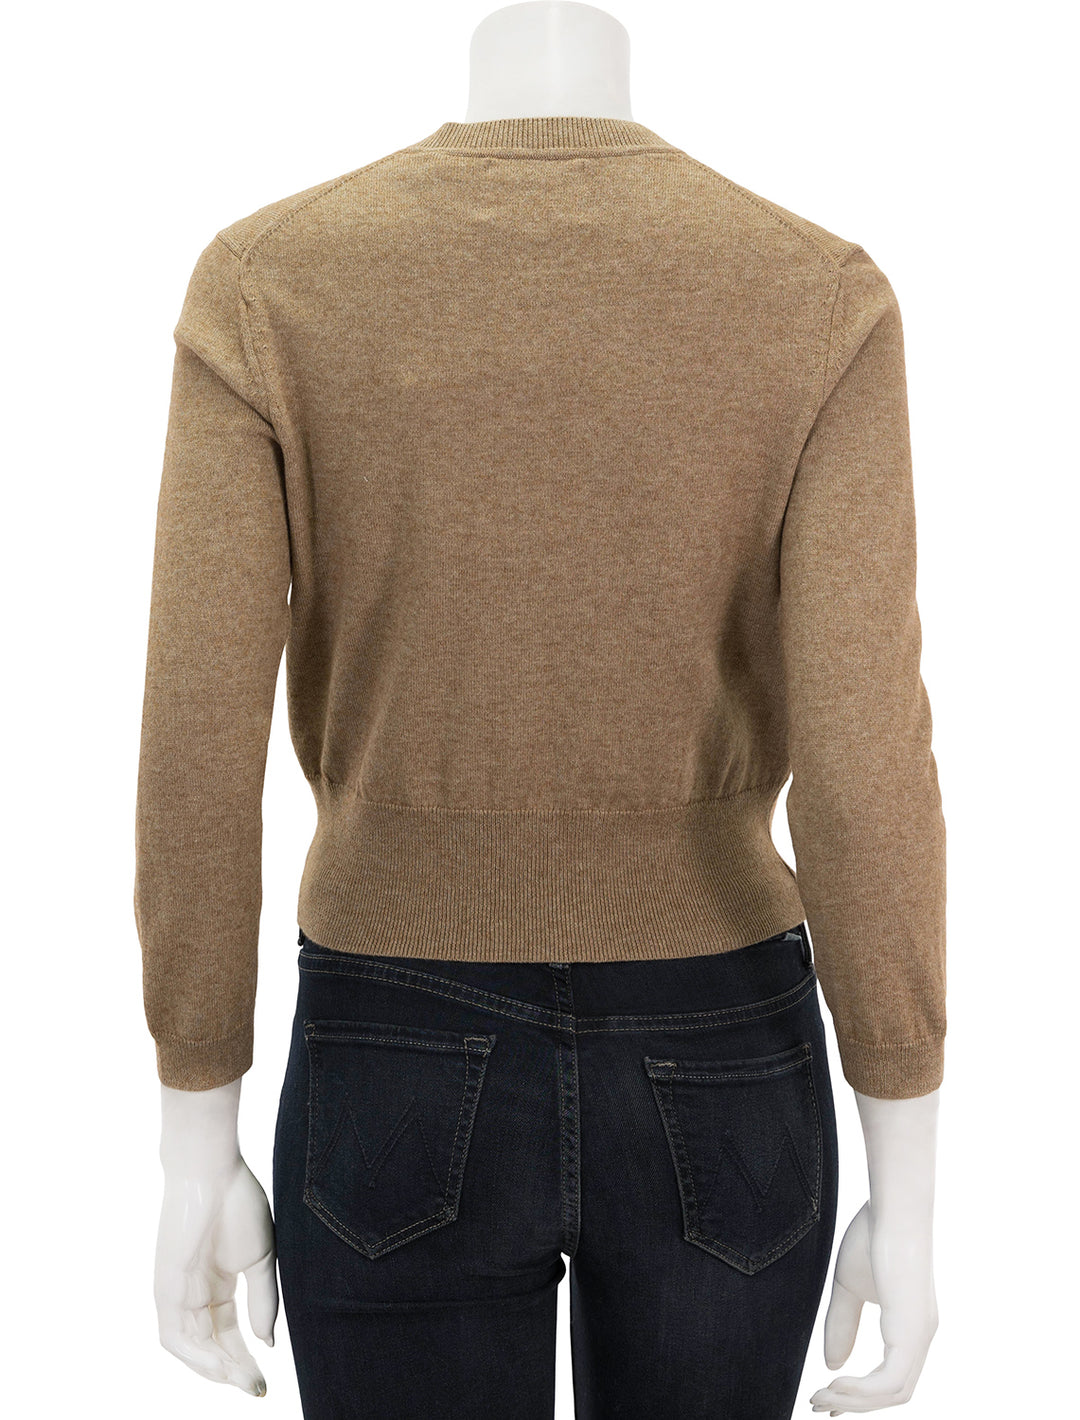 Back view of Isabel Marant Etoile's newton cardi in camel.